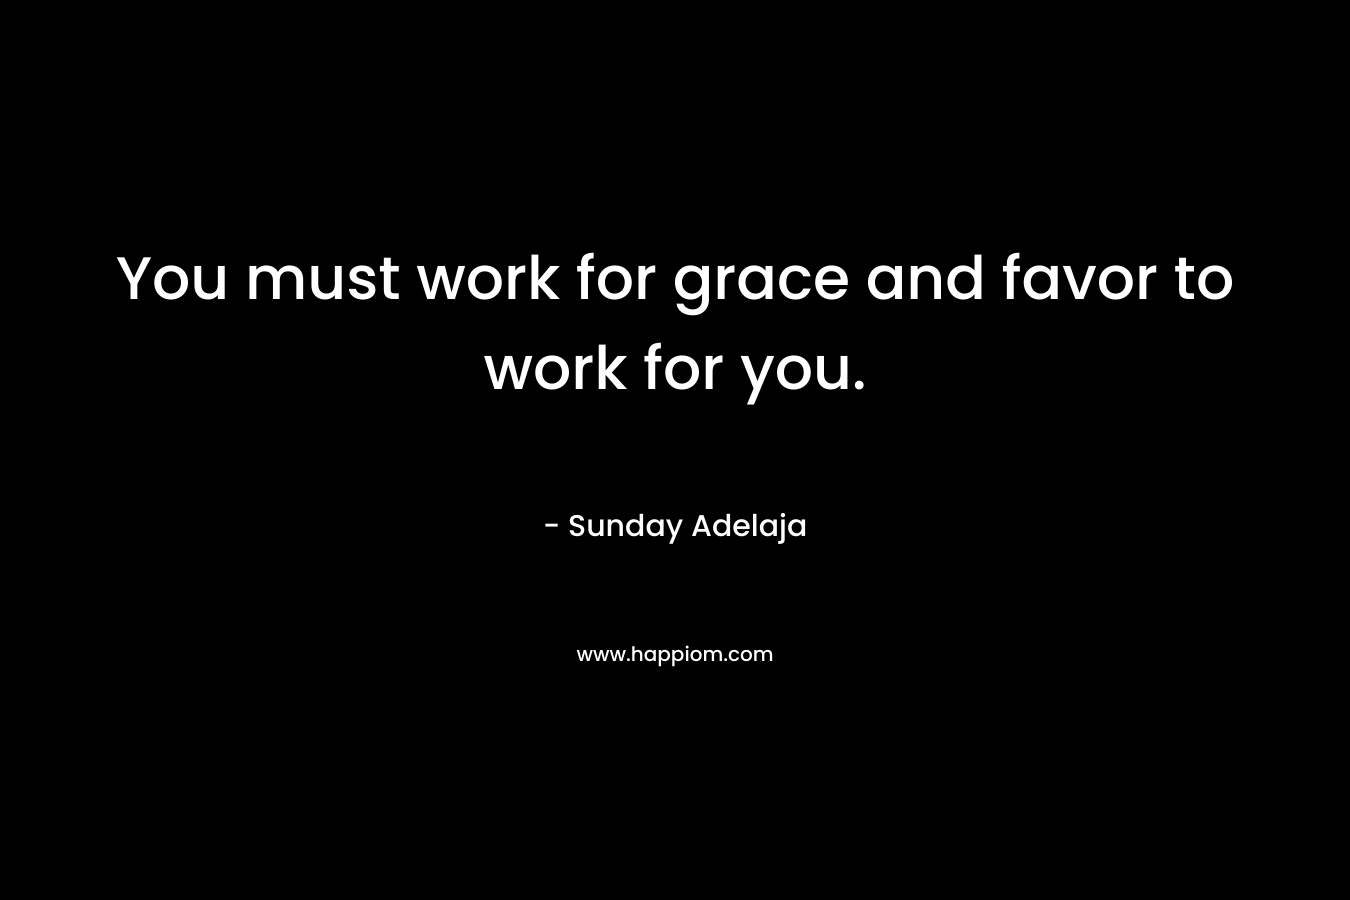 You must work for grace and favor to work for you.